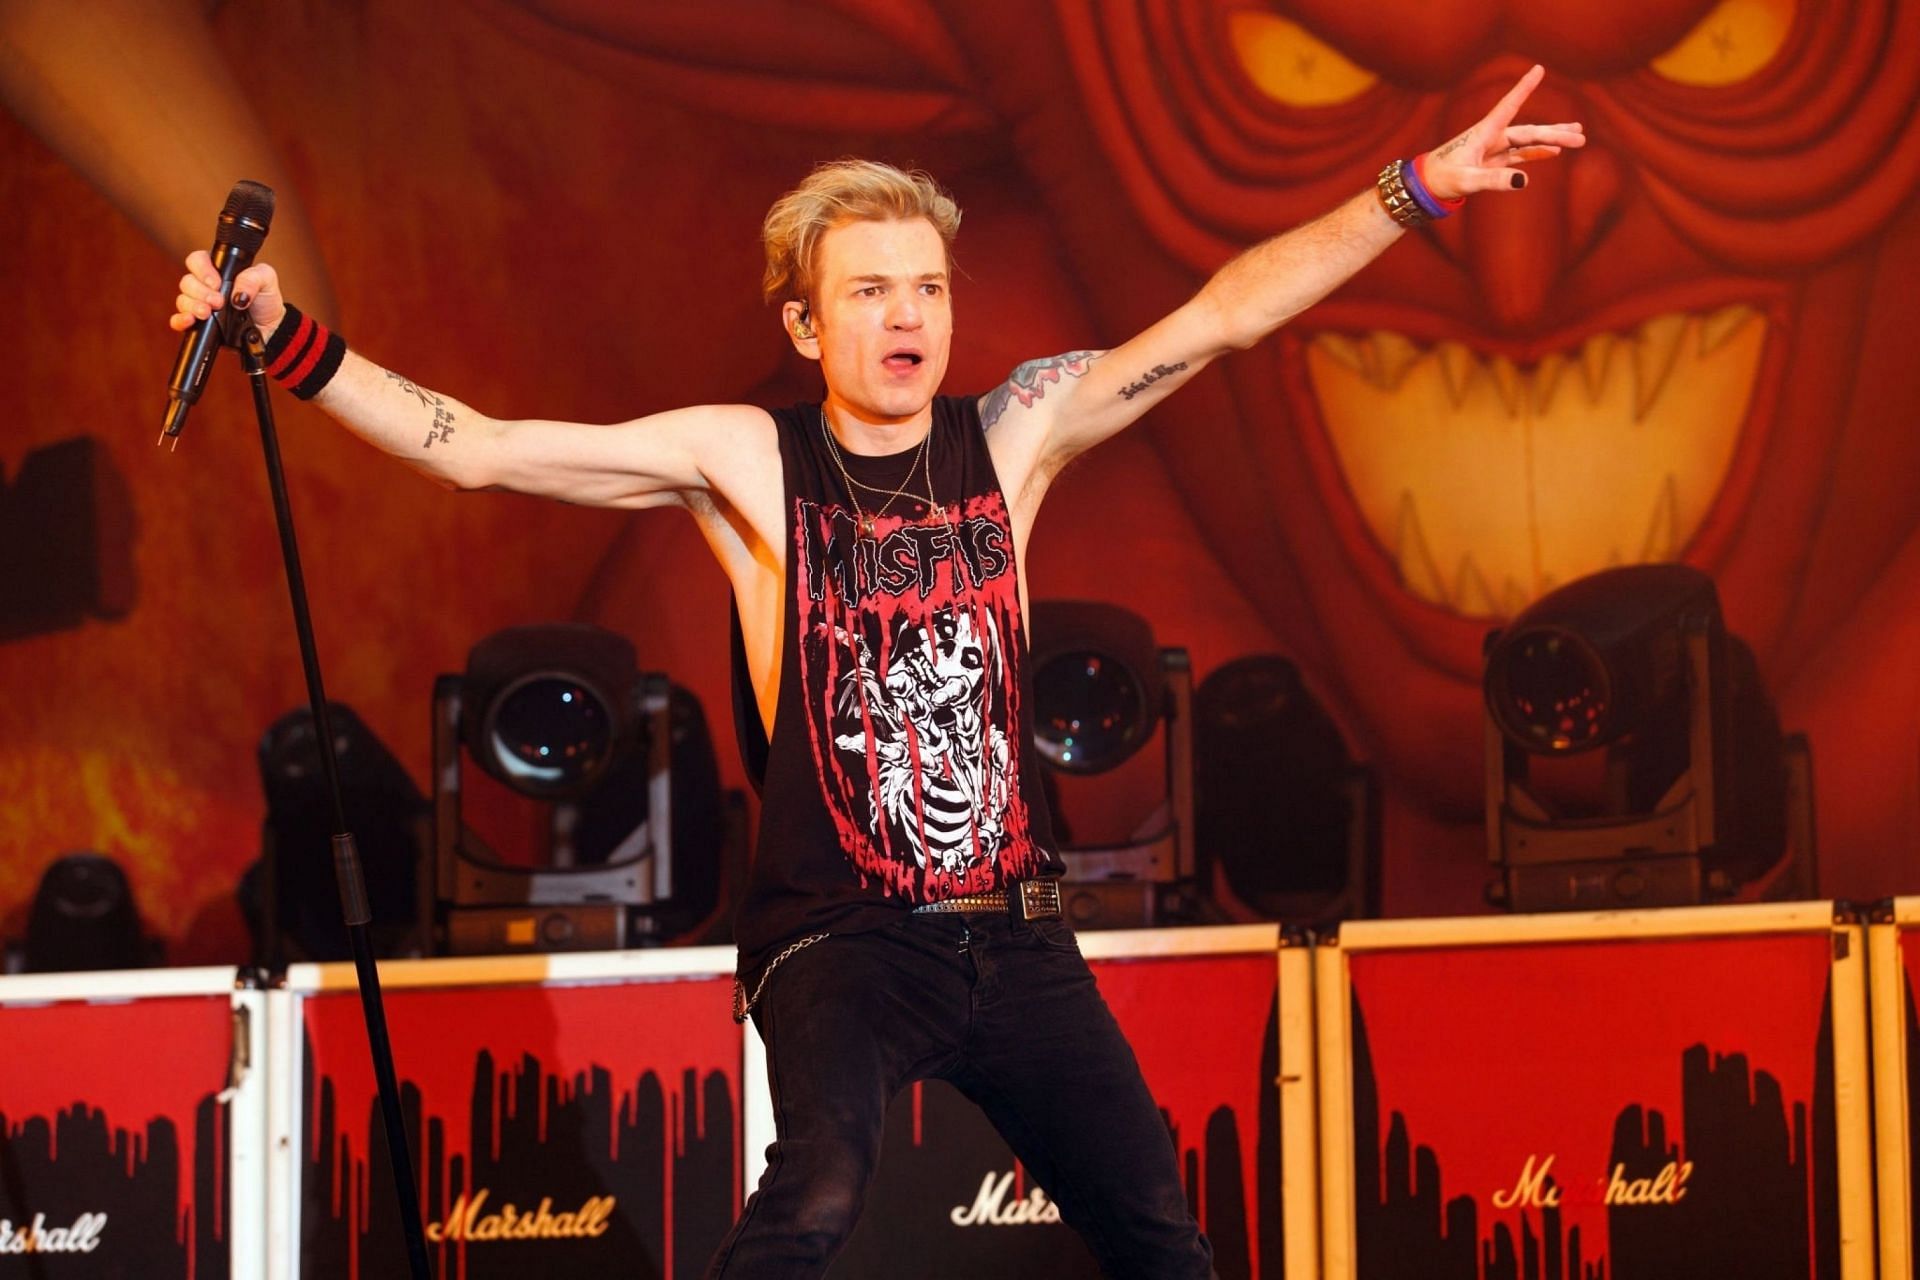 Sum 41 performs during the &quot;Does This Look All Killer No Filler&quot; tour at Alexandra Palace on October 21, 2022 in London, England. (Image via Getty Images)